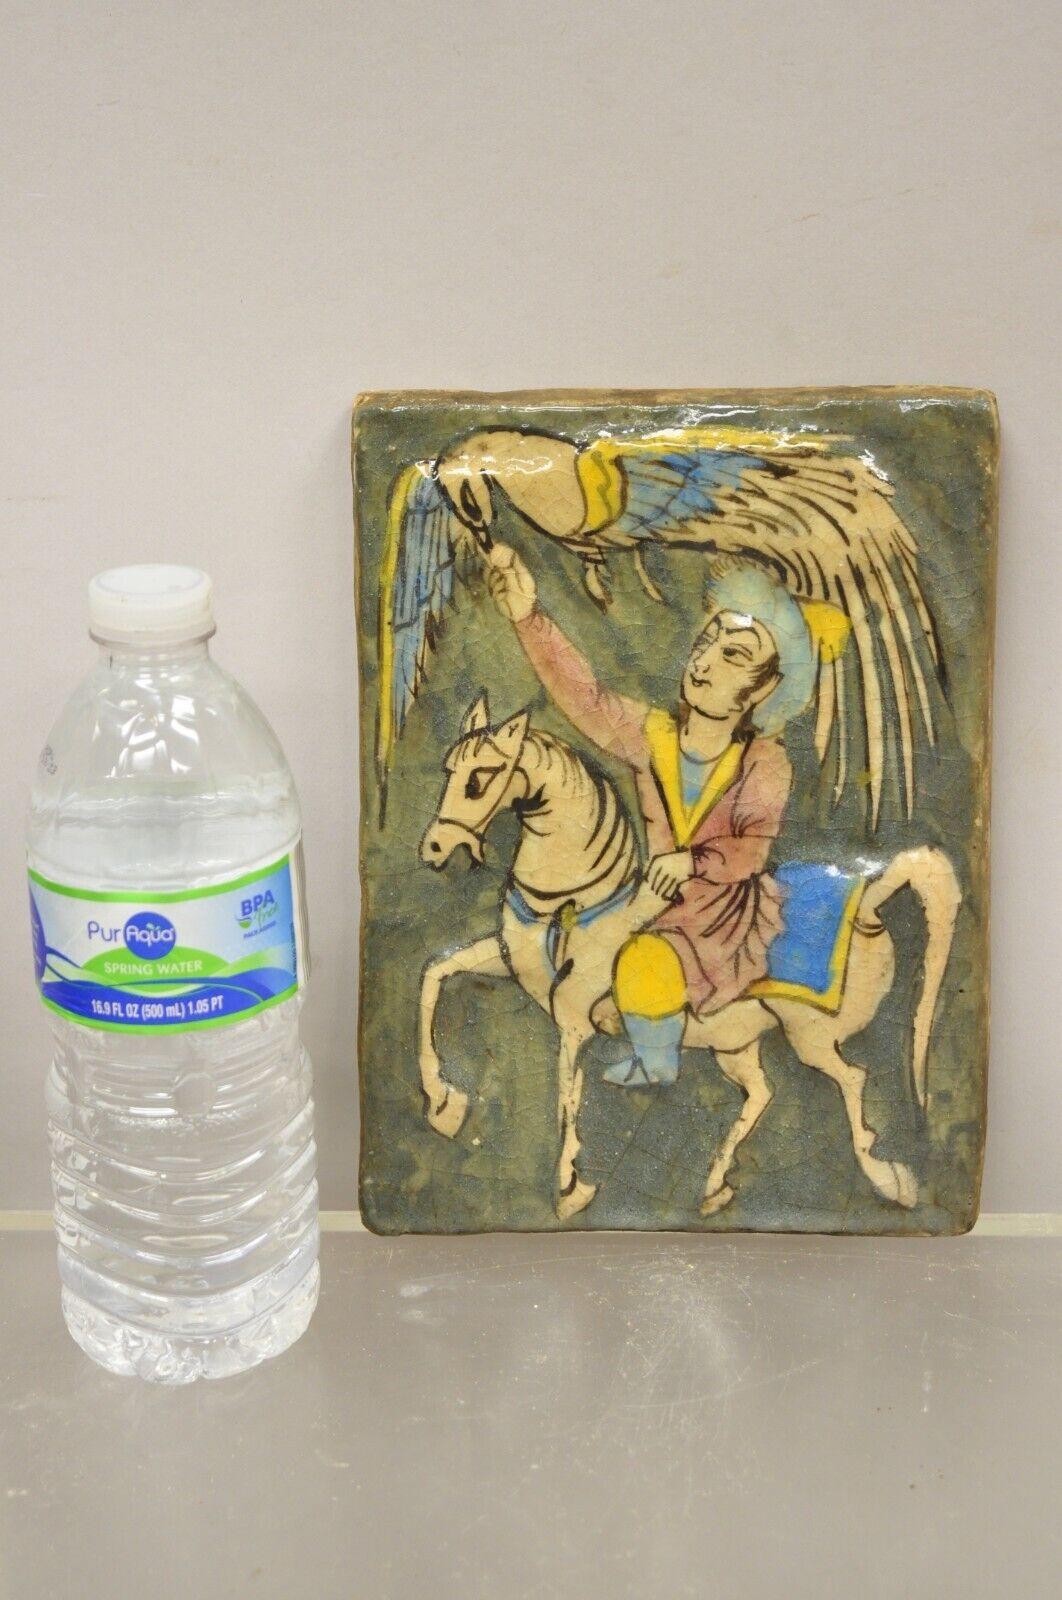 Antique Persian Iznik Qajar Style ceramic pottery tile horse rider and bird C4. Item features original crackle glazed finish, heavy ceramic pottery construction, very impressive detail, wonderful style and form. Great to mount as wall art or accent